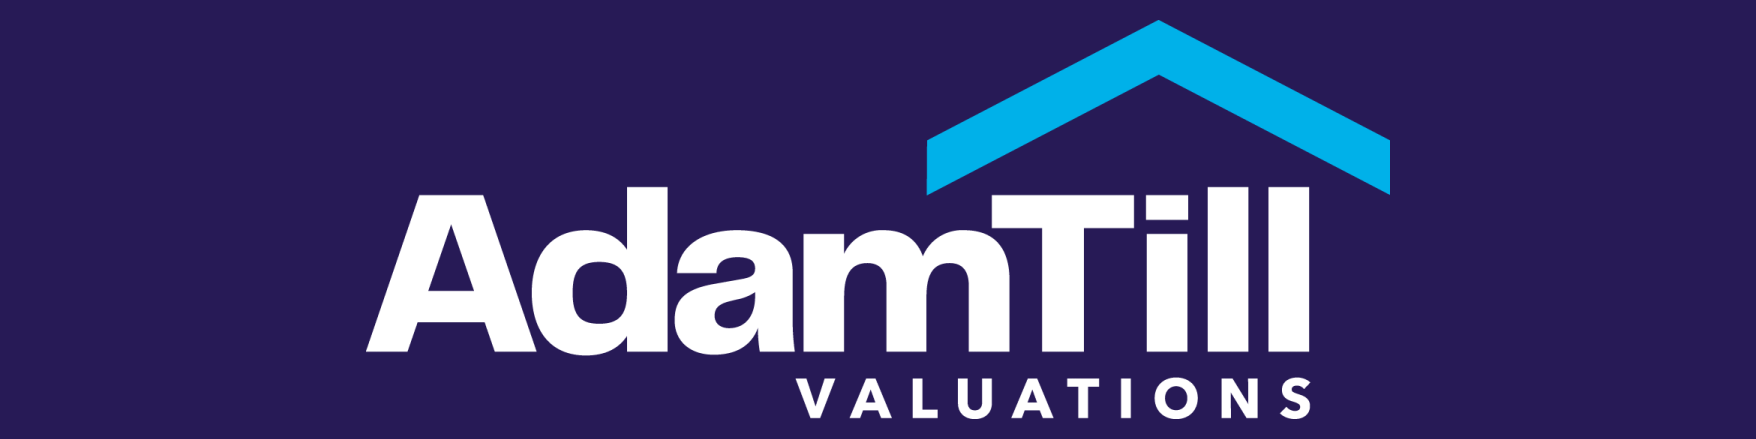 Logo for AdamTill Valuations with the company name in white text on a dark blue background. A stylized blue roof appears above the text, highlighting our expertise in RICS Valuation services.